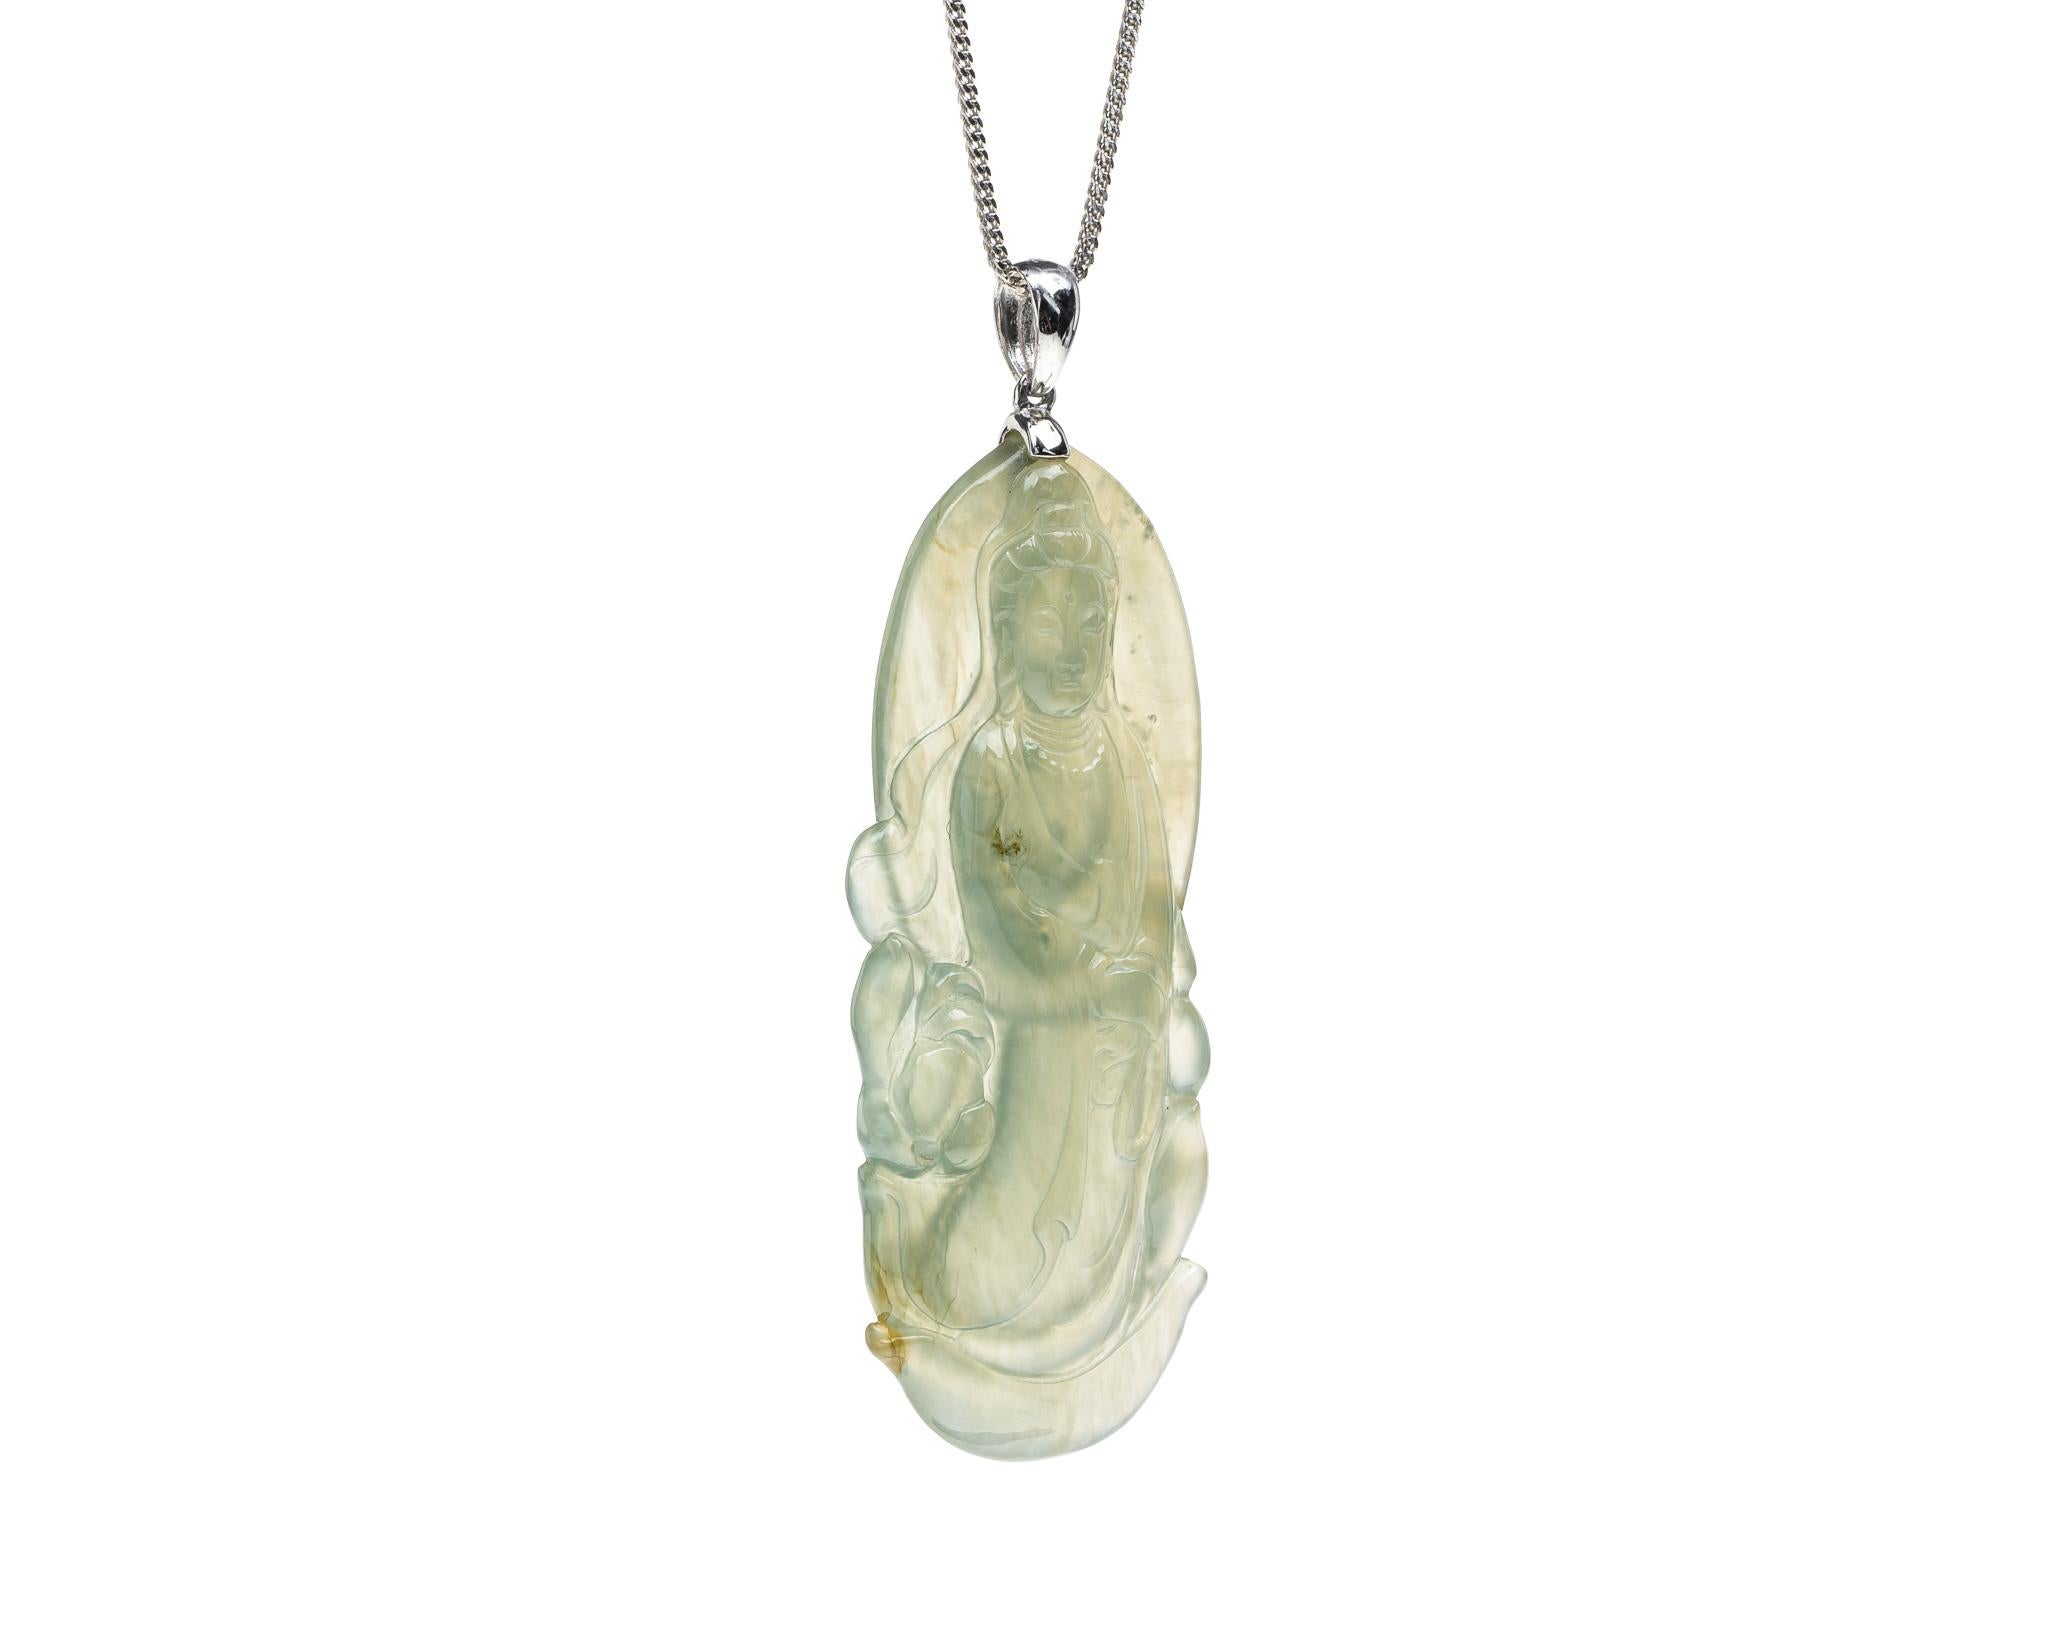 This is an all natural, untreated green jadeite jade carved Quan Yin god pendant set on an 18K white gold bail.  The carved Quan Yin god symbolizes compassion and protection. 

It measures 2.28 inches (58 mm) x 0.84 inches (21.3 mm) with thickness